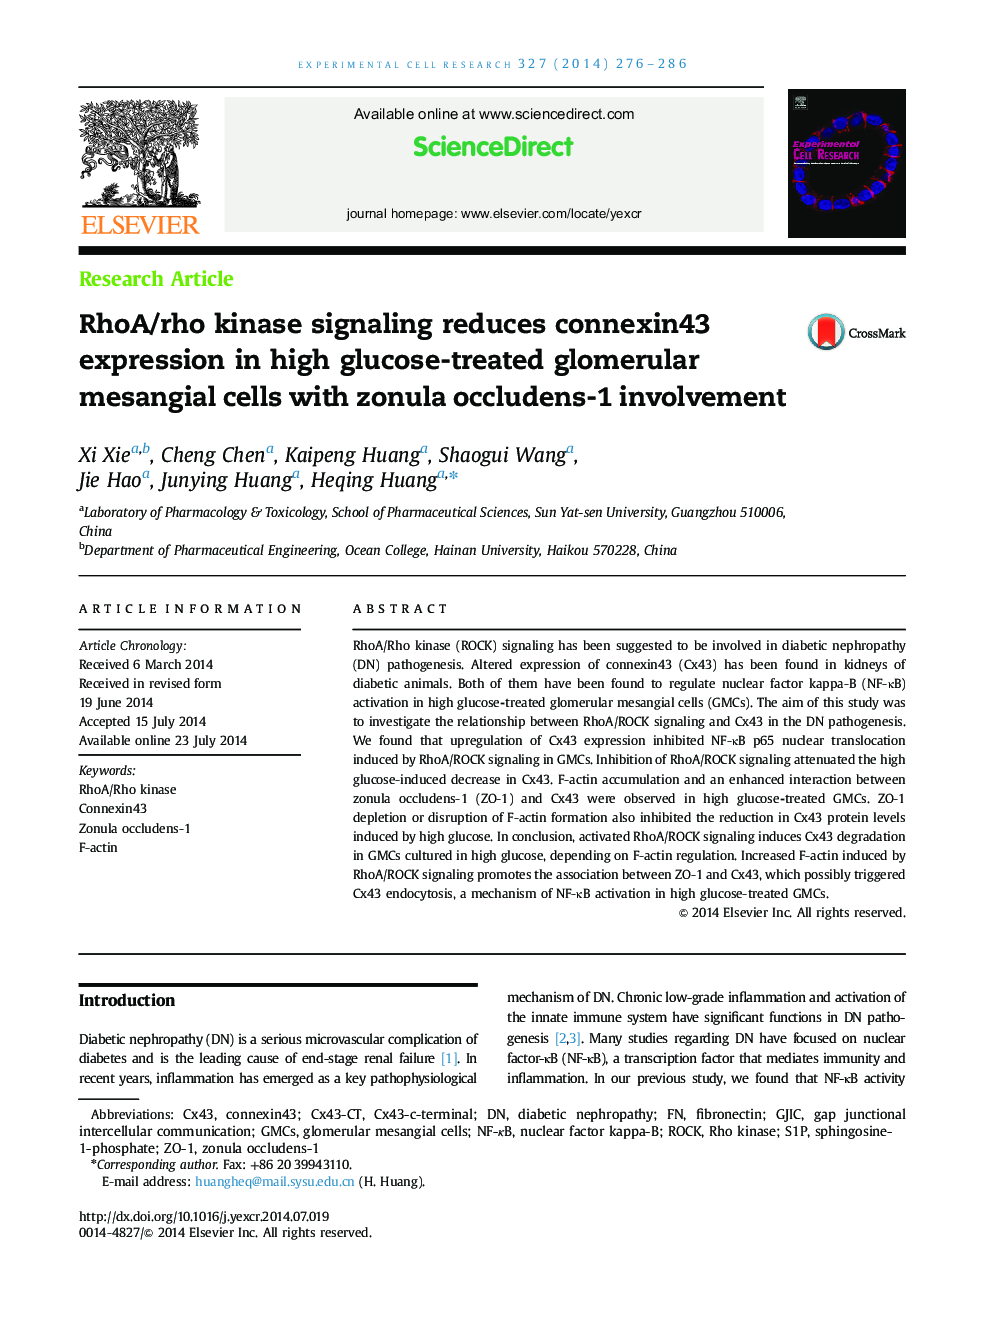 RhoA/rho kinase signaling reduces connexin43 expression in high glucose-treated glomerular mesangial cells with zonula occludens-1 involvement